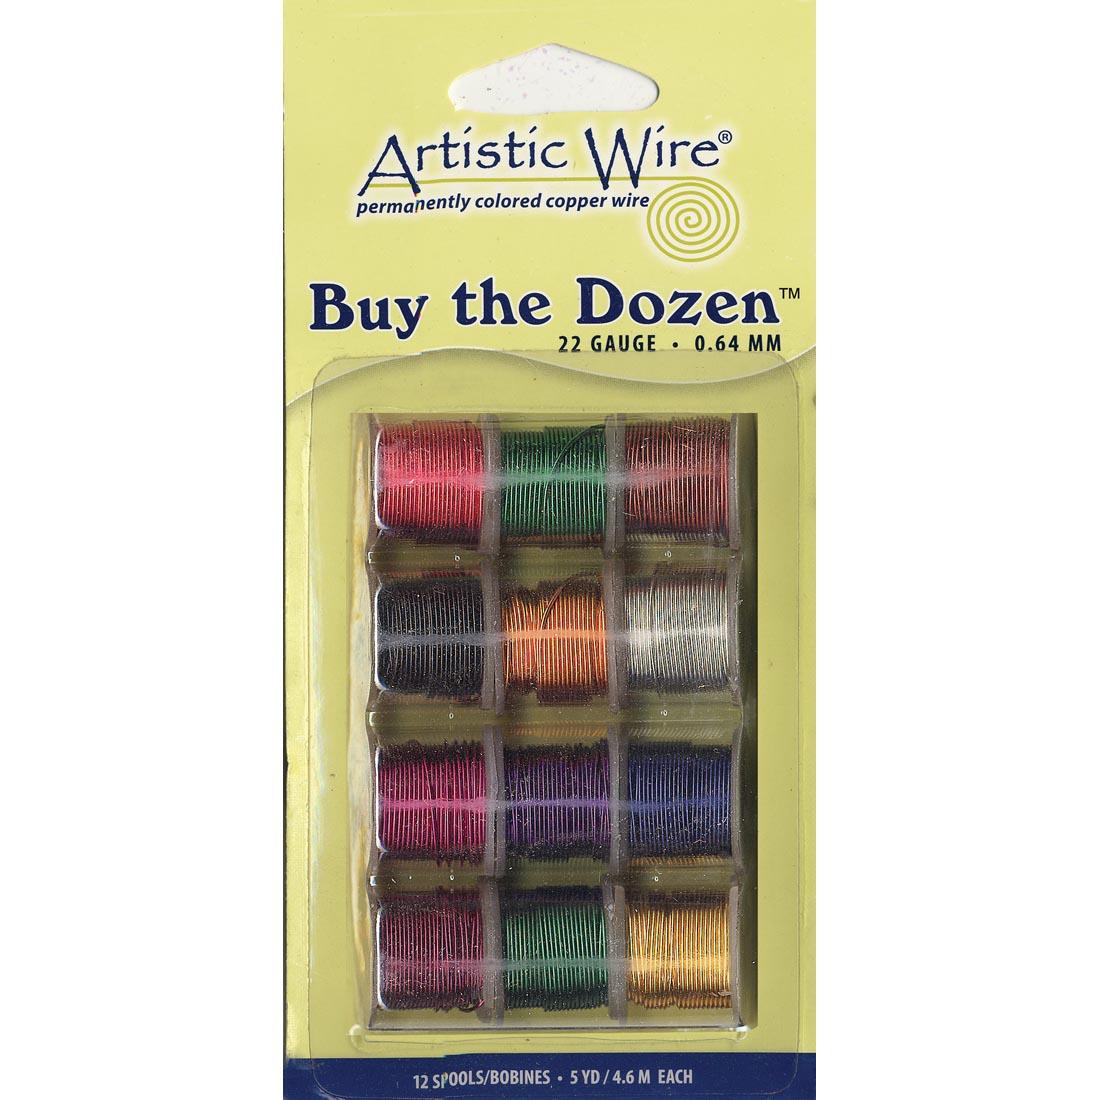 Artistic Wire Permanently Colored Copper Wire 5-Yard Spools 22-Gauge Set